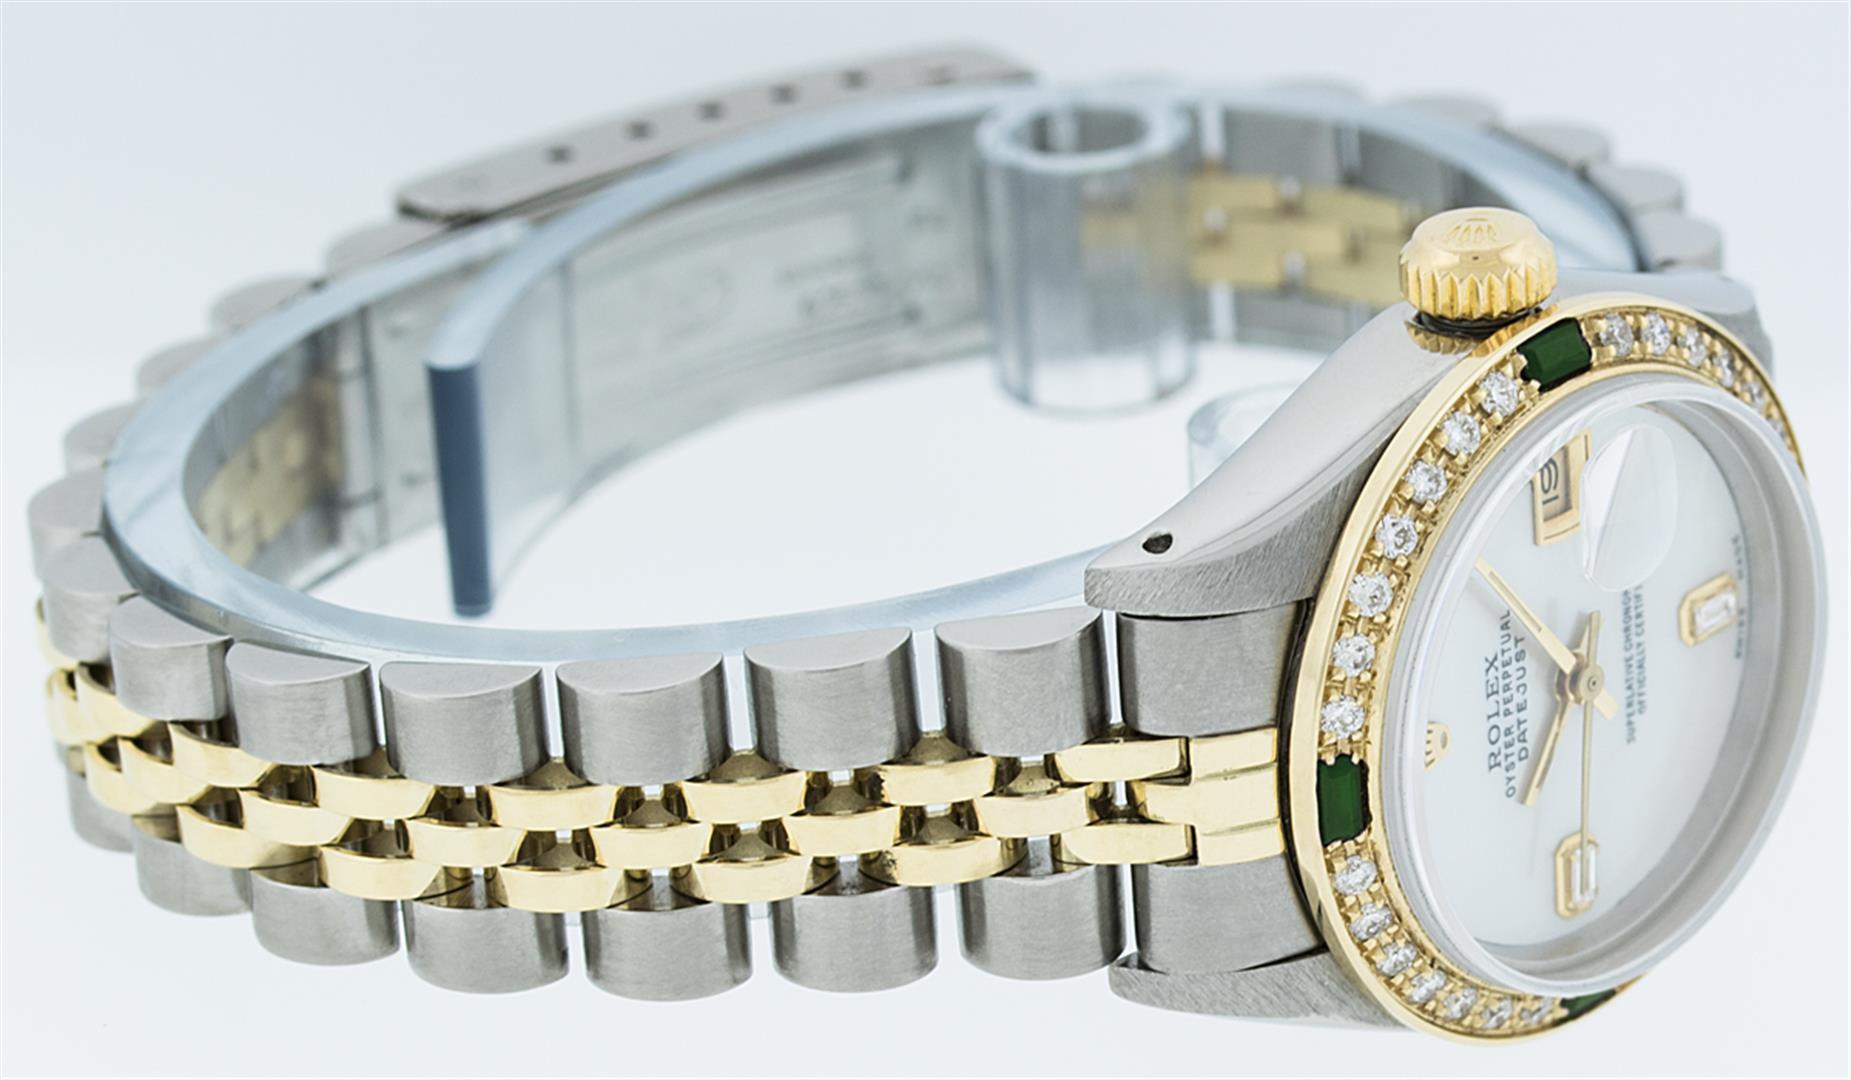 Rolex Two-Tone MOP Diamond and Emerald DateJust Ladies Watch